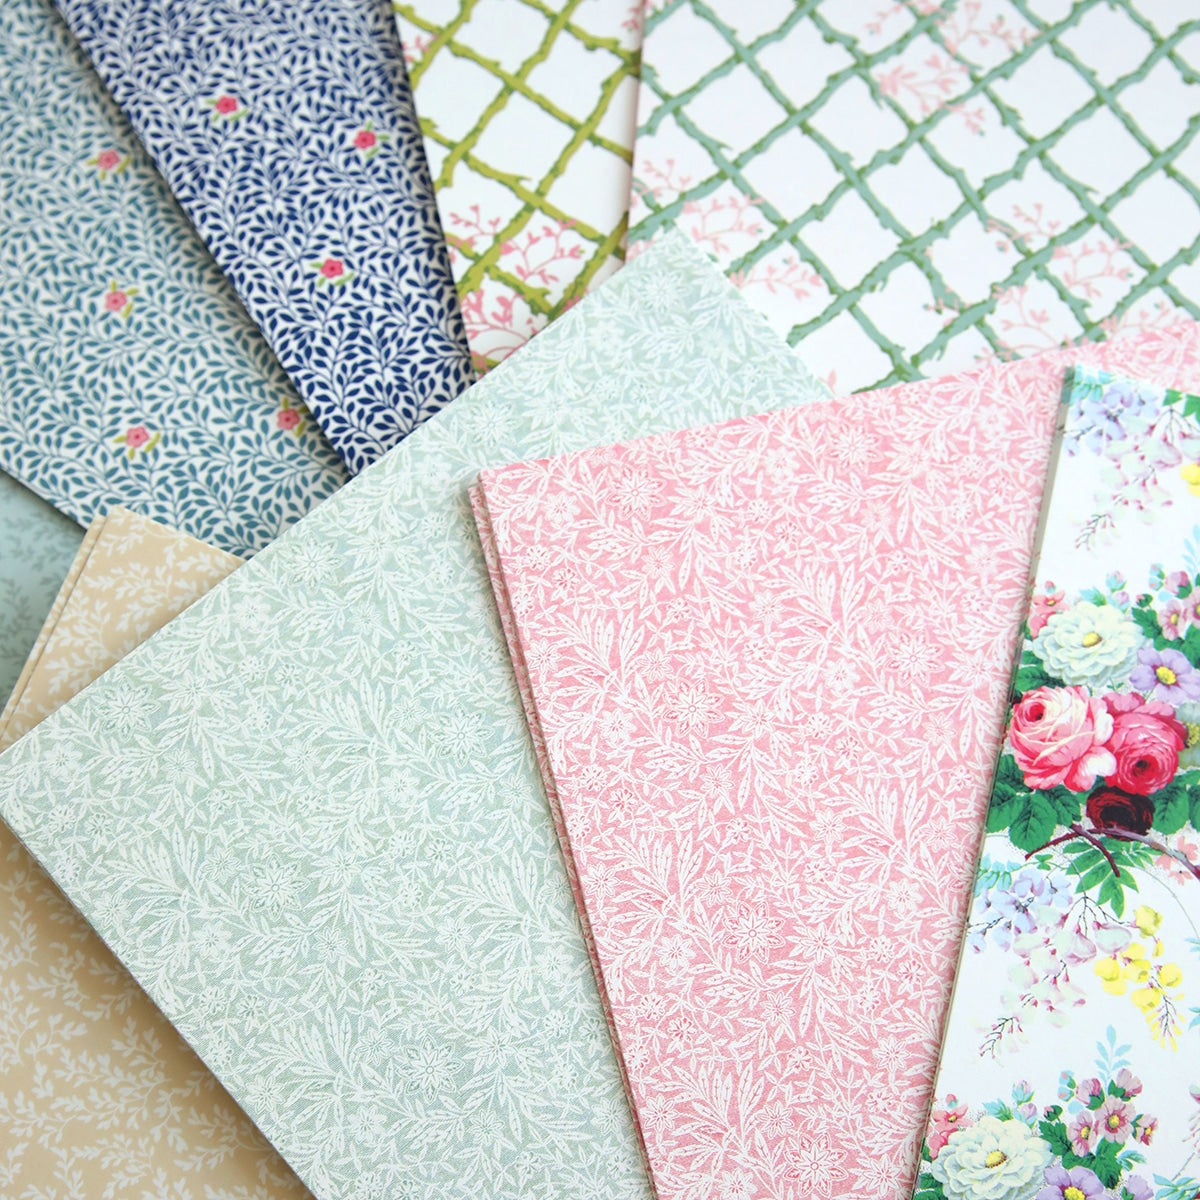 A close up of Flower Shop Double Sided Cardstock papers in many different colors.